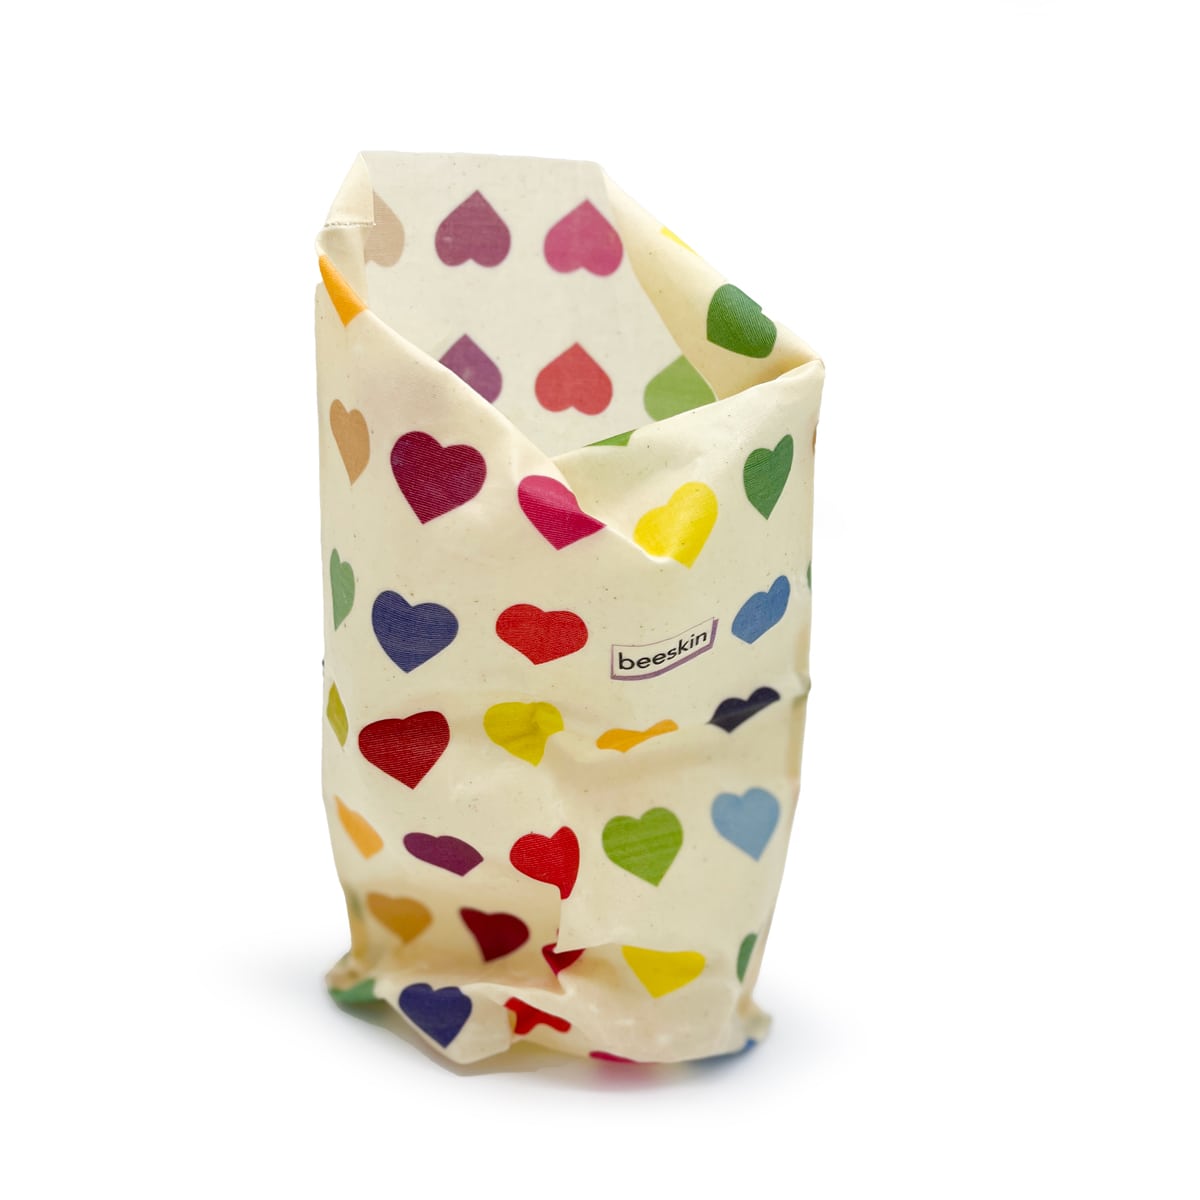 beeskin beeswax bag size s colorful hearts in blue, red, yellow green, pink